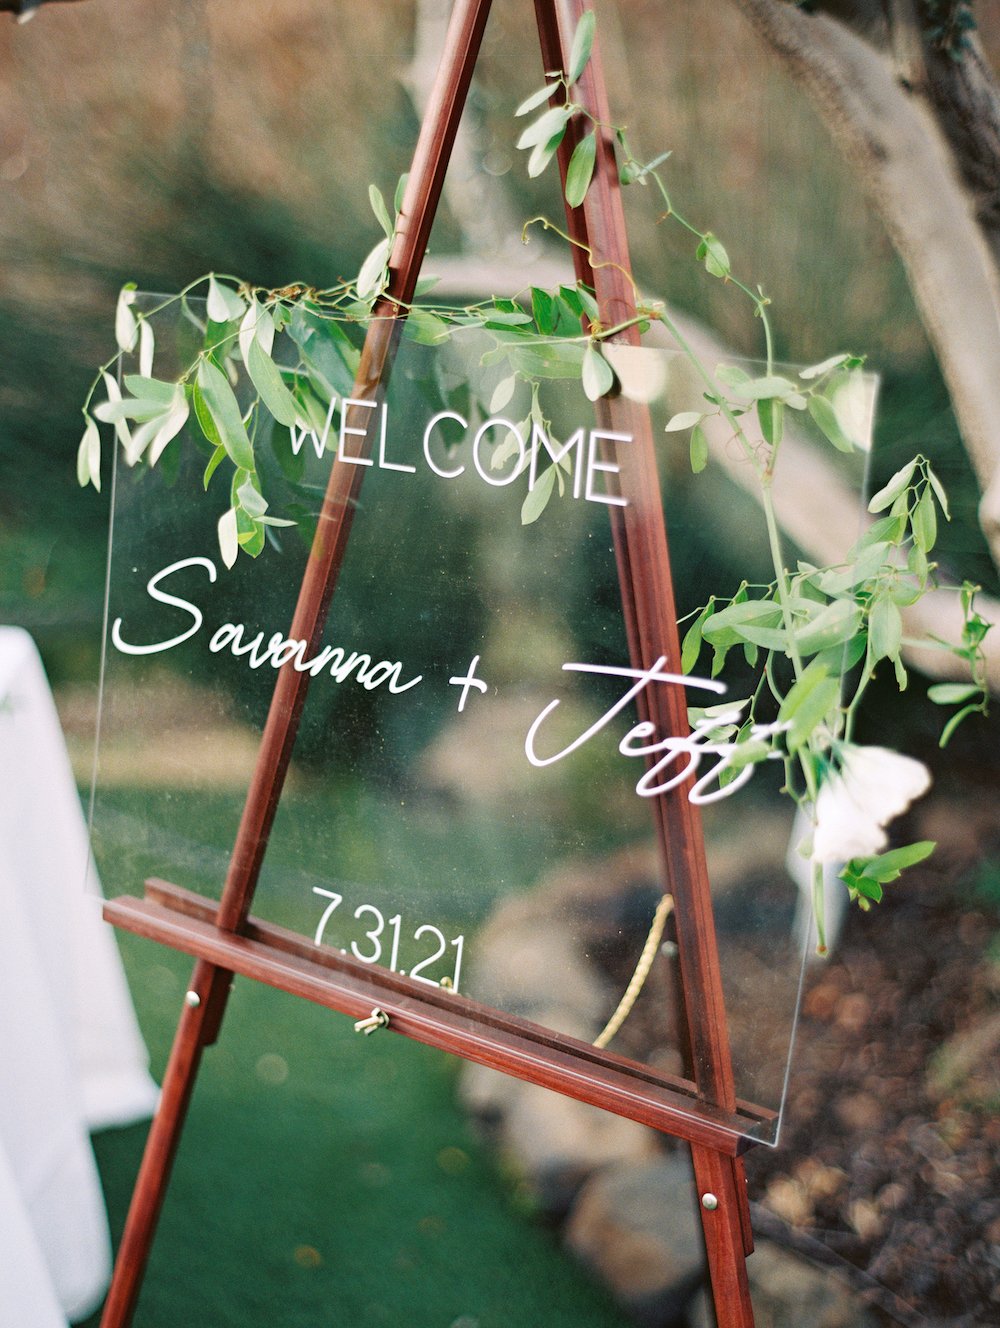 Glass wedding welcome sign on a wooden easel.